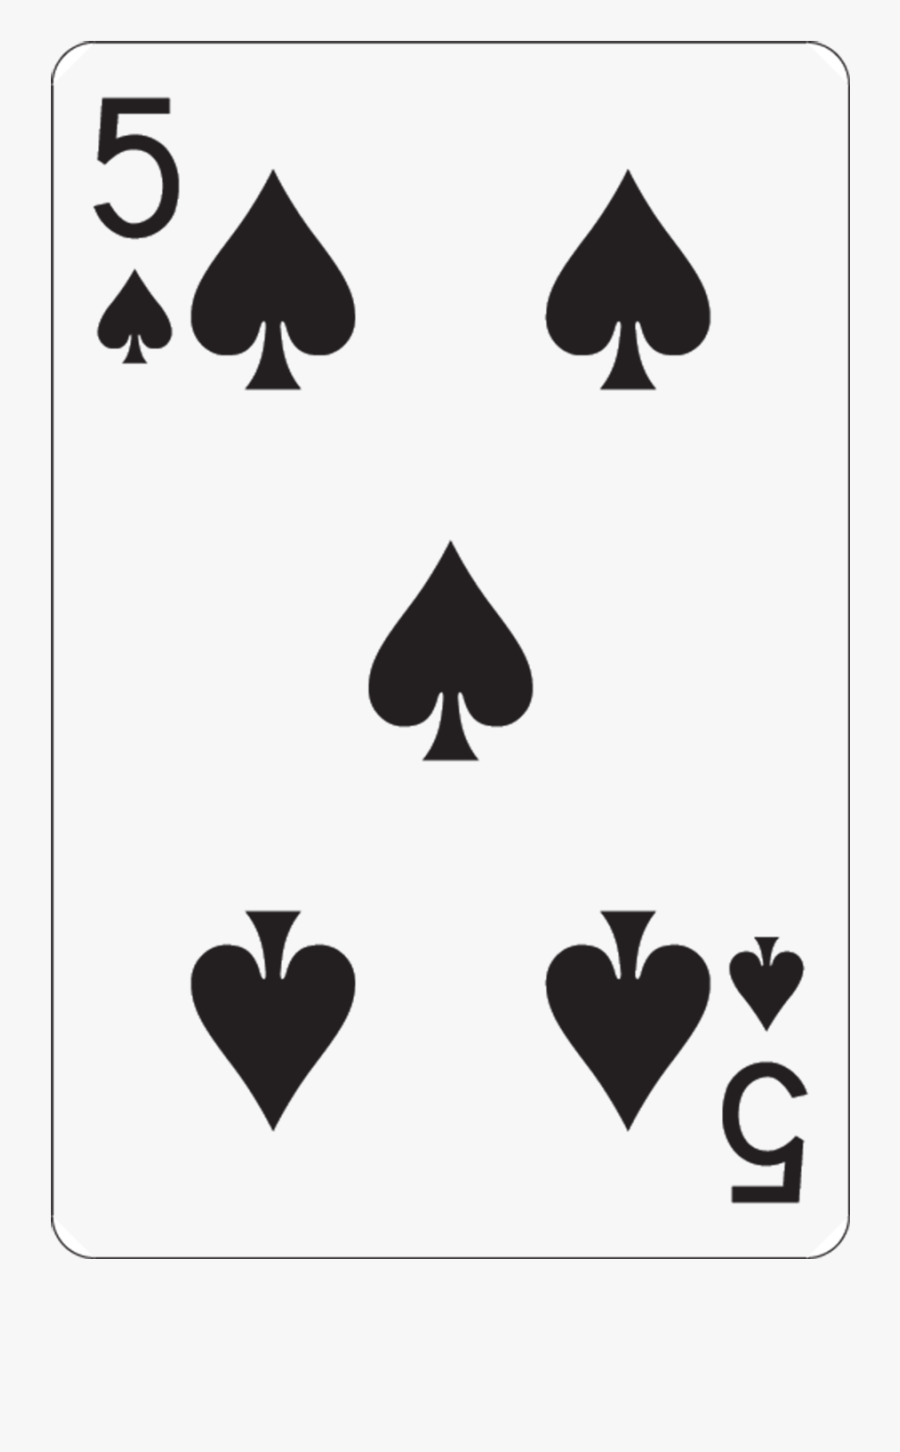 10 Of Spades Bicycle, Transparent Clipart